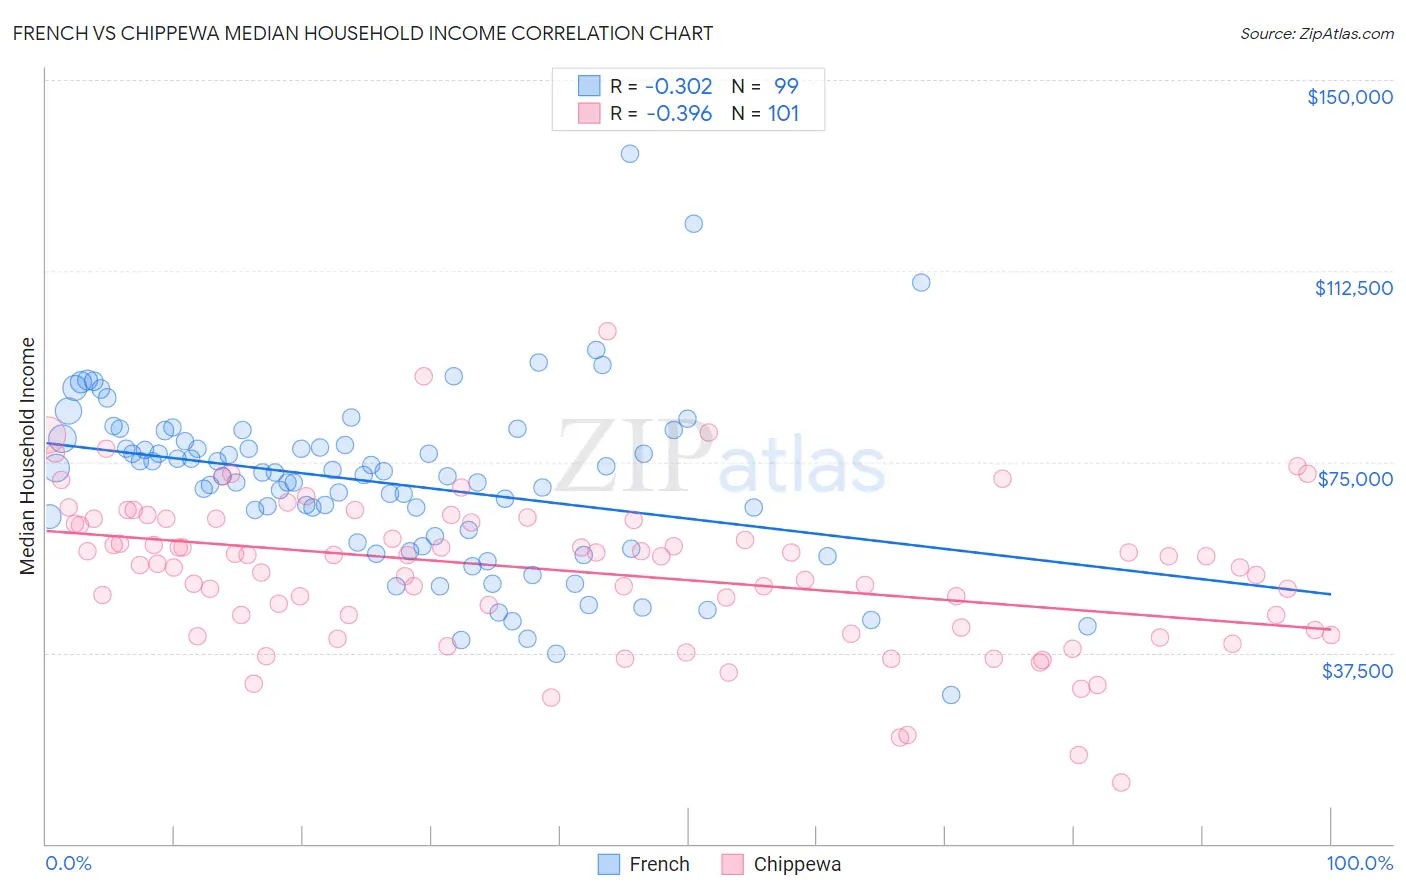 French vs Chippewa Median Household Income